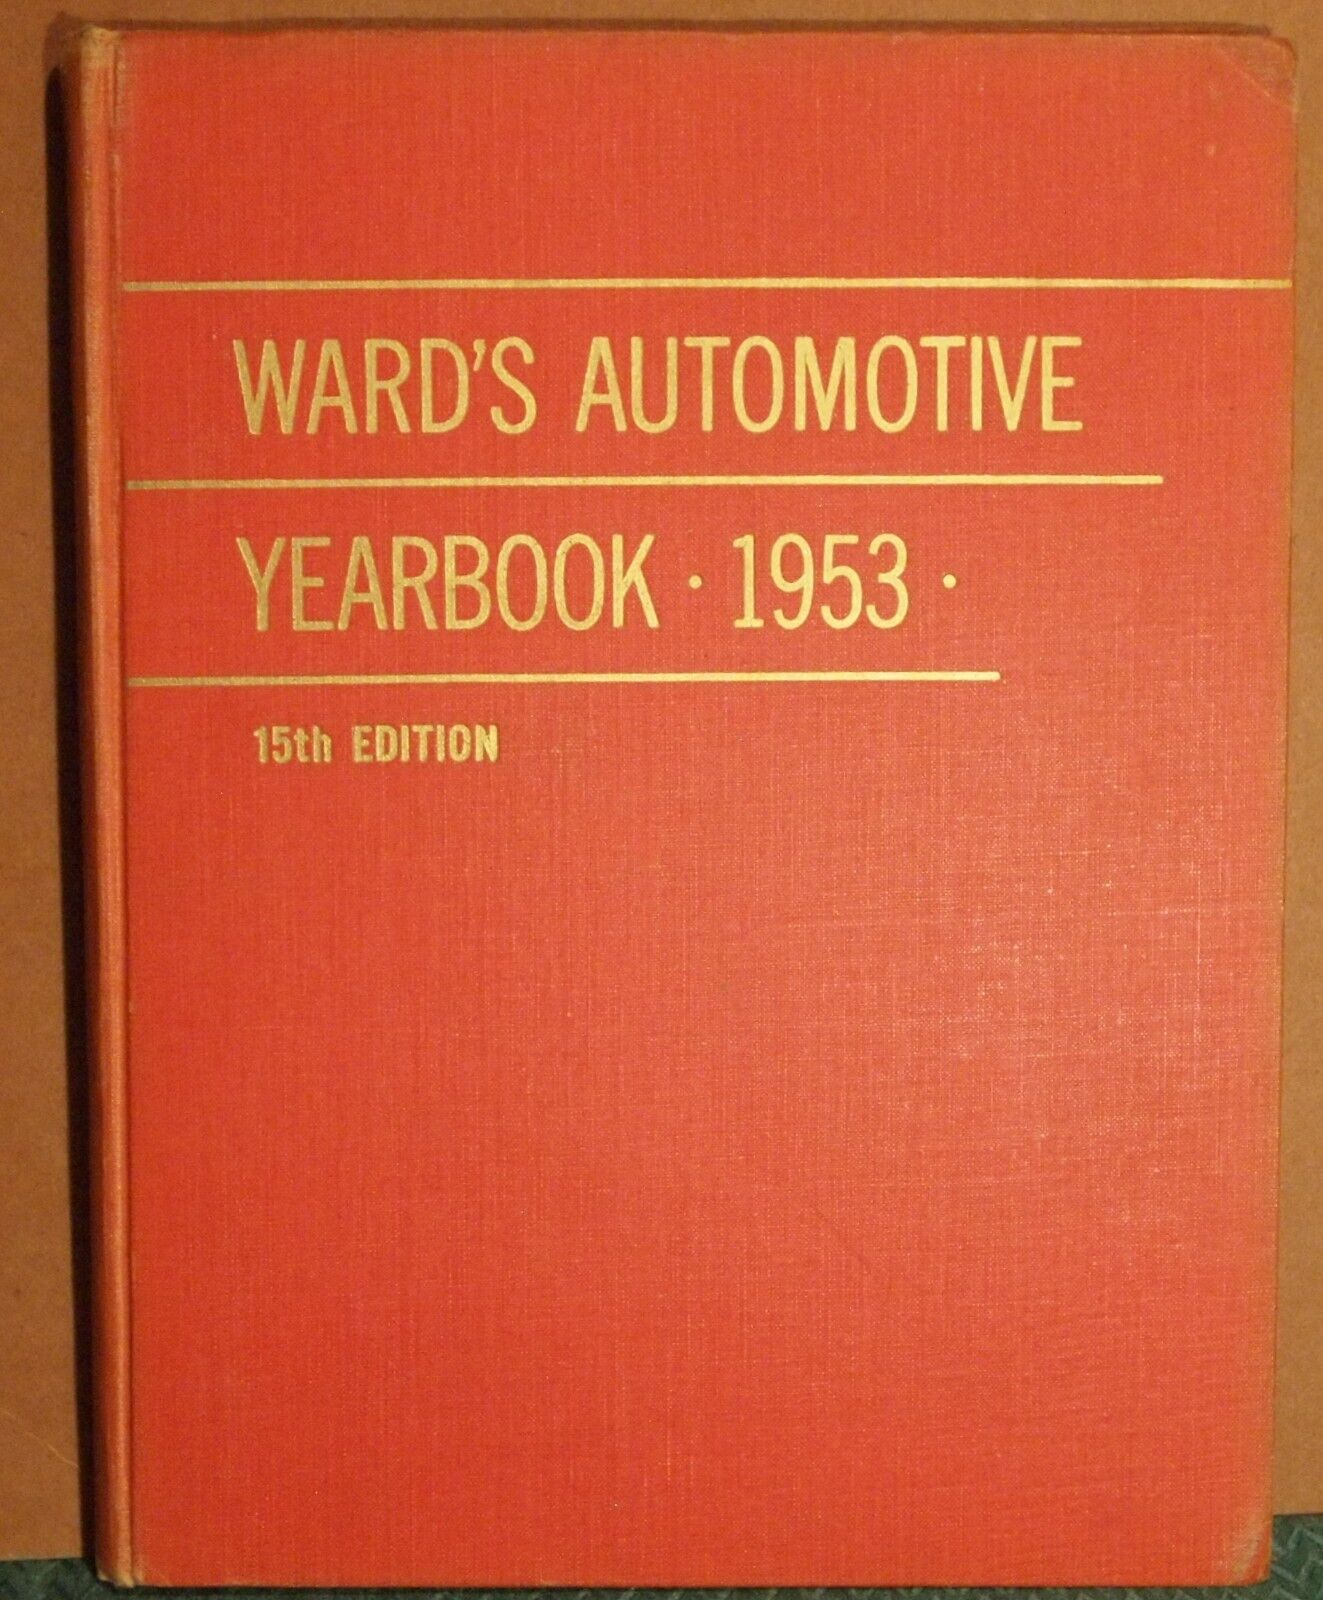 1953 WARD'S AUTOMOTIVE YEARBOOK 15th edition WARDS-10